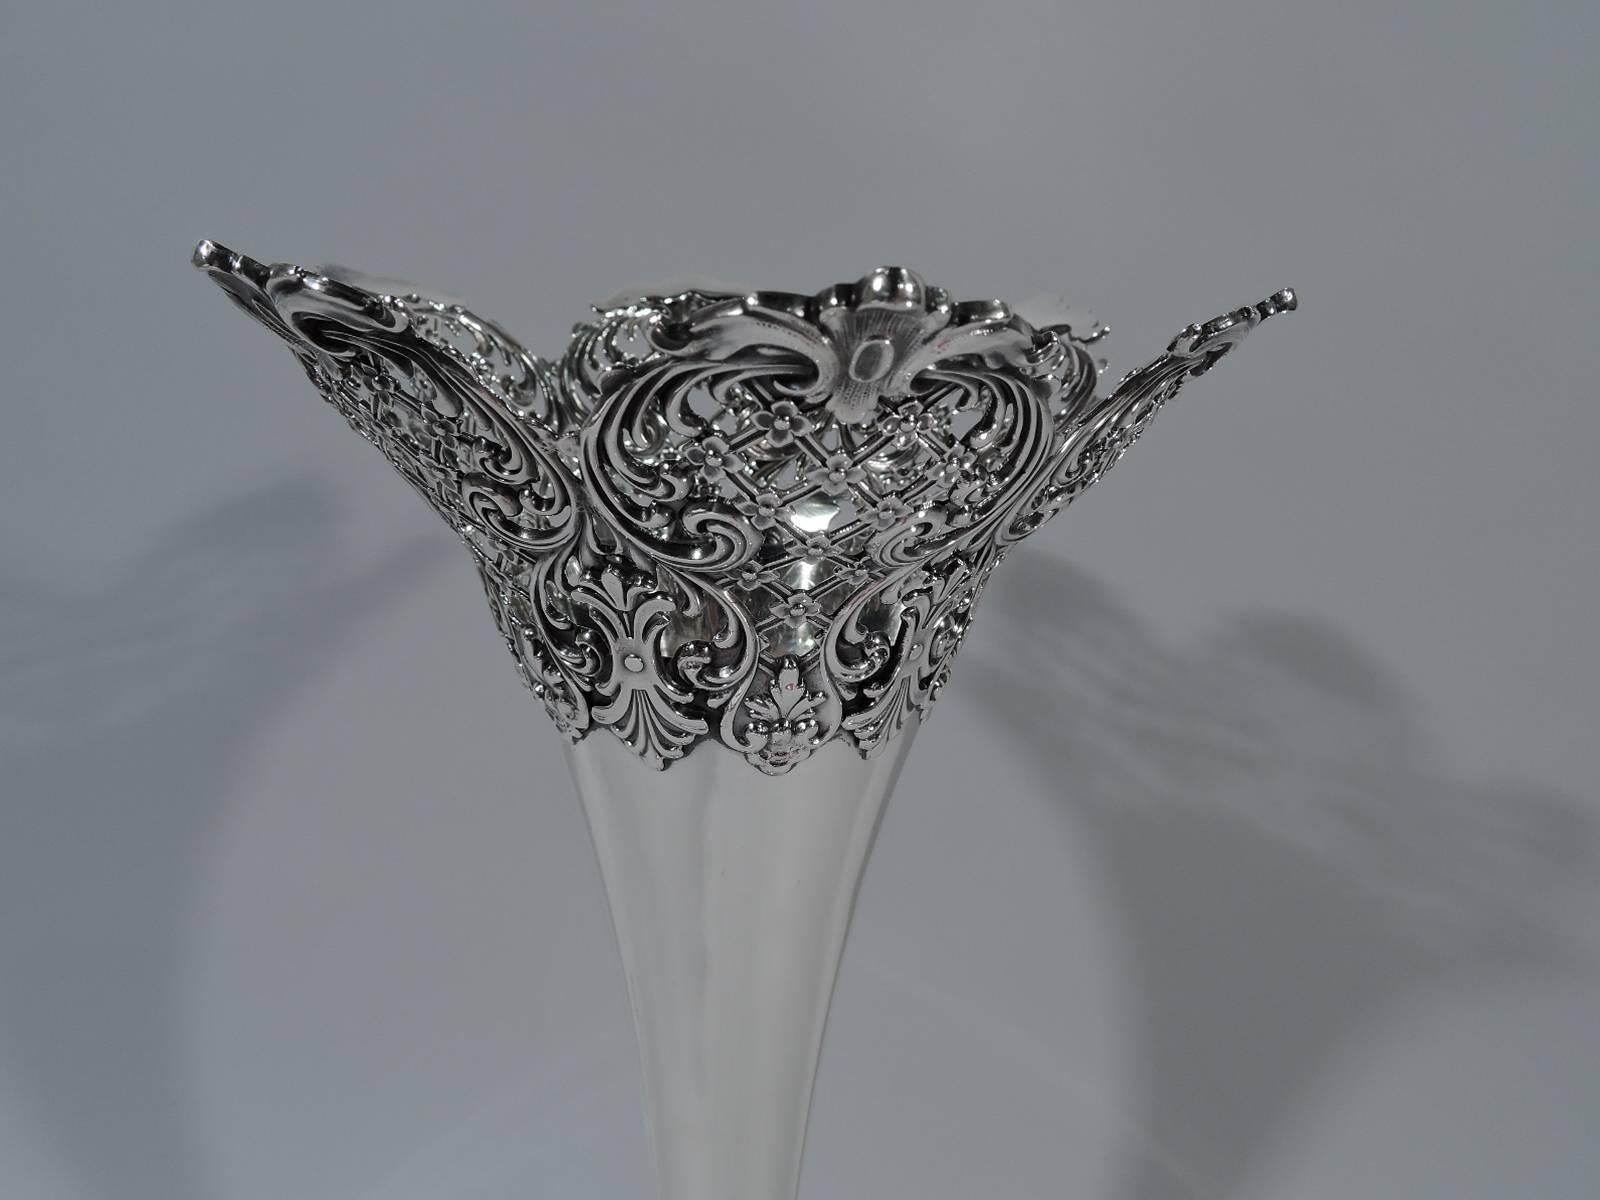 Edwardian sterling silver vase. Made by Redlich in New York, circa 1910. Trumpet vase on knop on dome foot. Pierced and applied rim and foot rim: Leaf-mounted scrolled frames inset with floral diaper ornament and surmounted by leaves. A successful